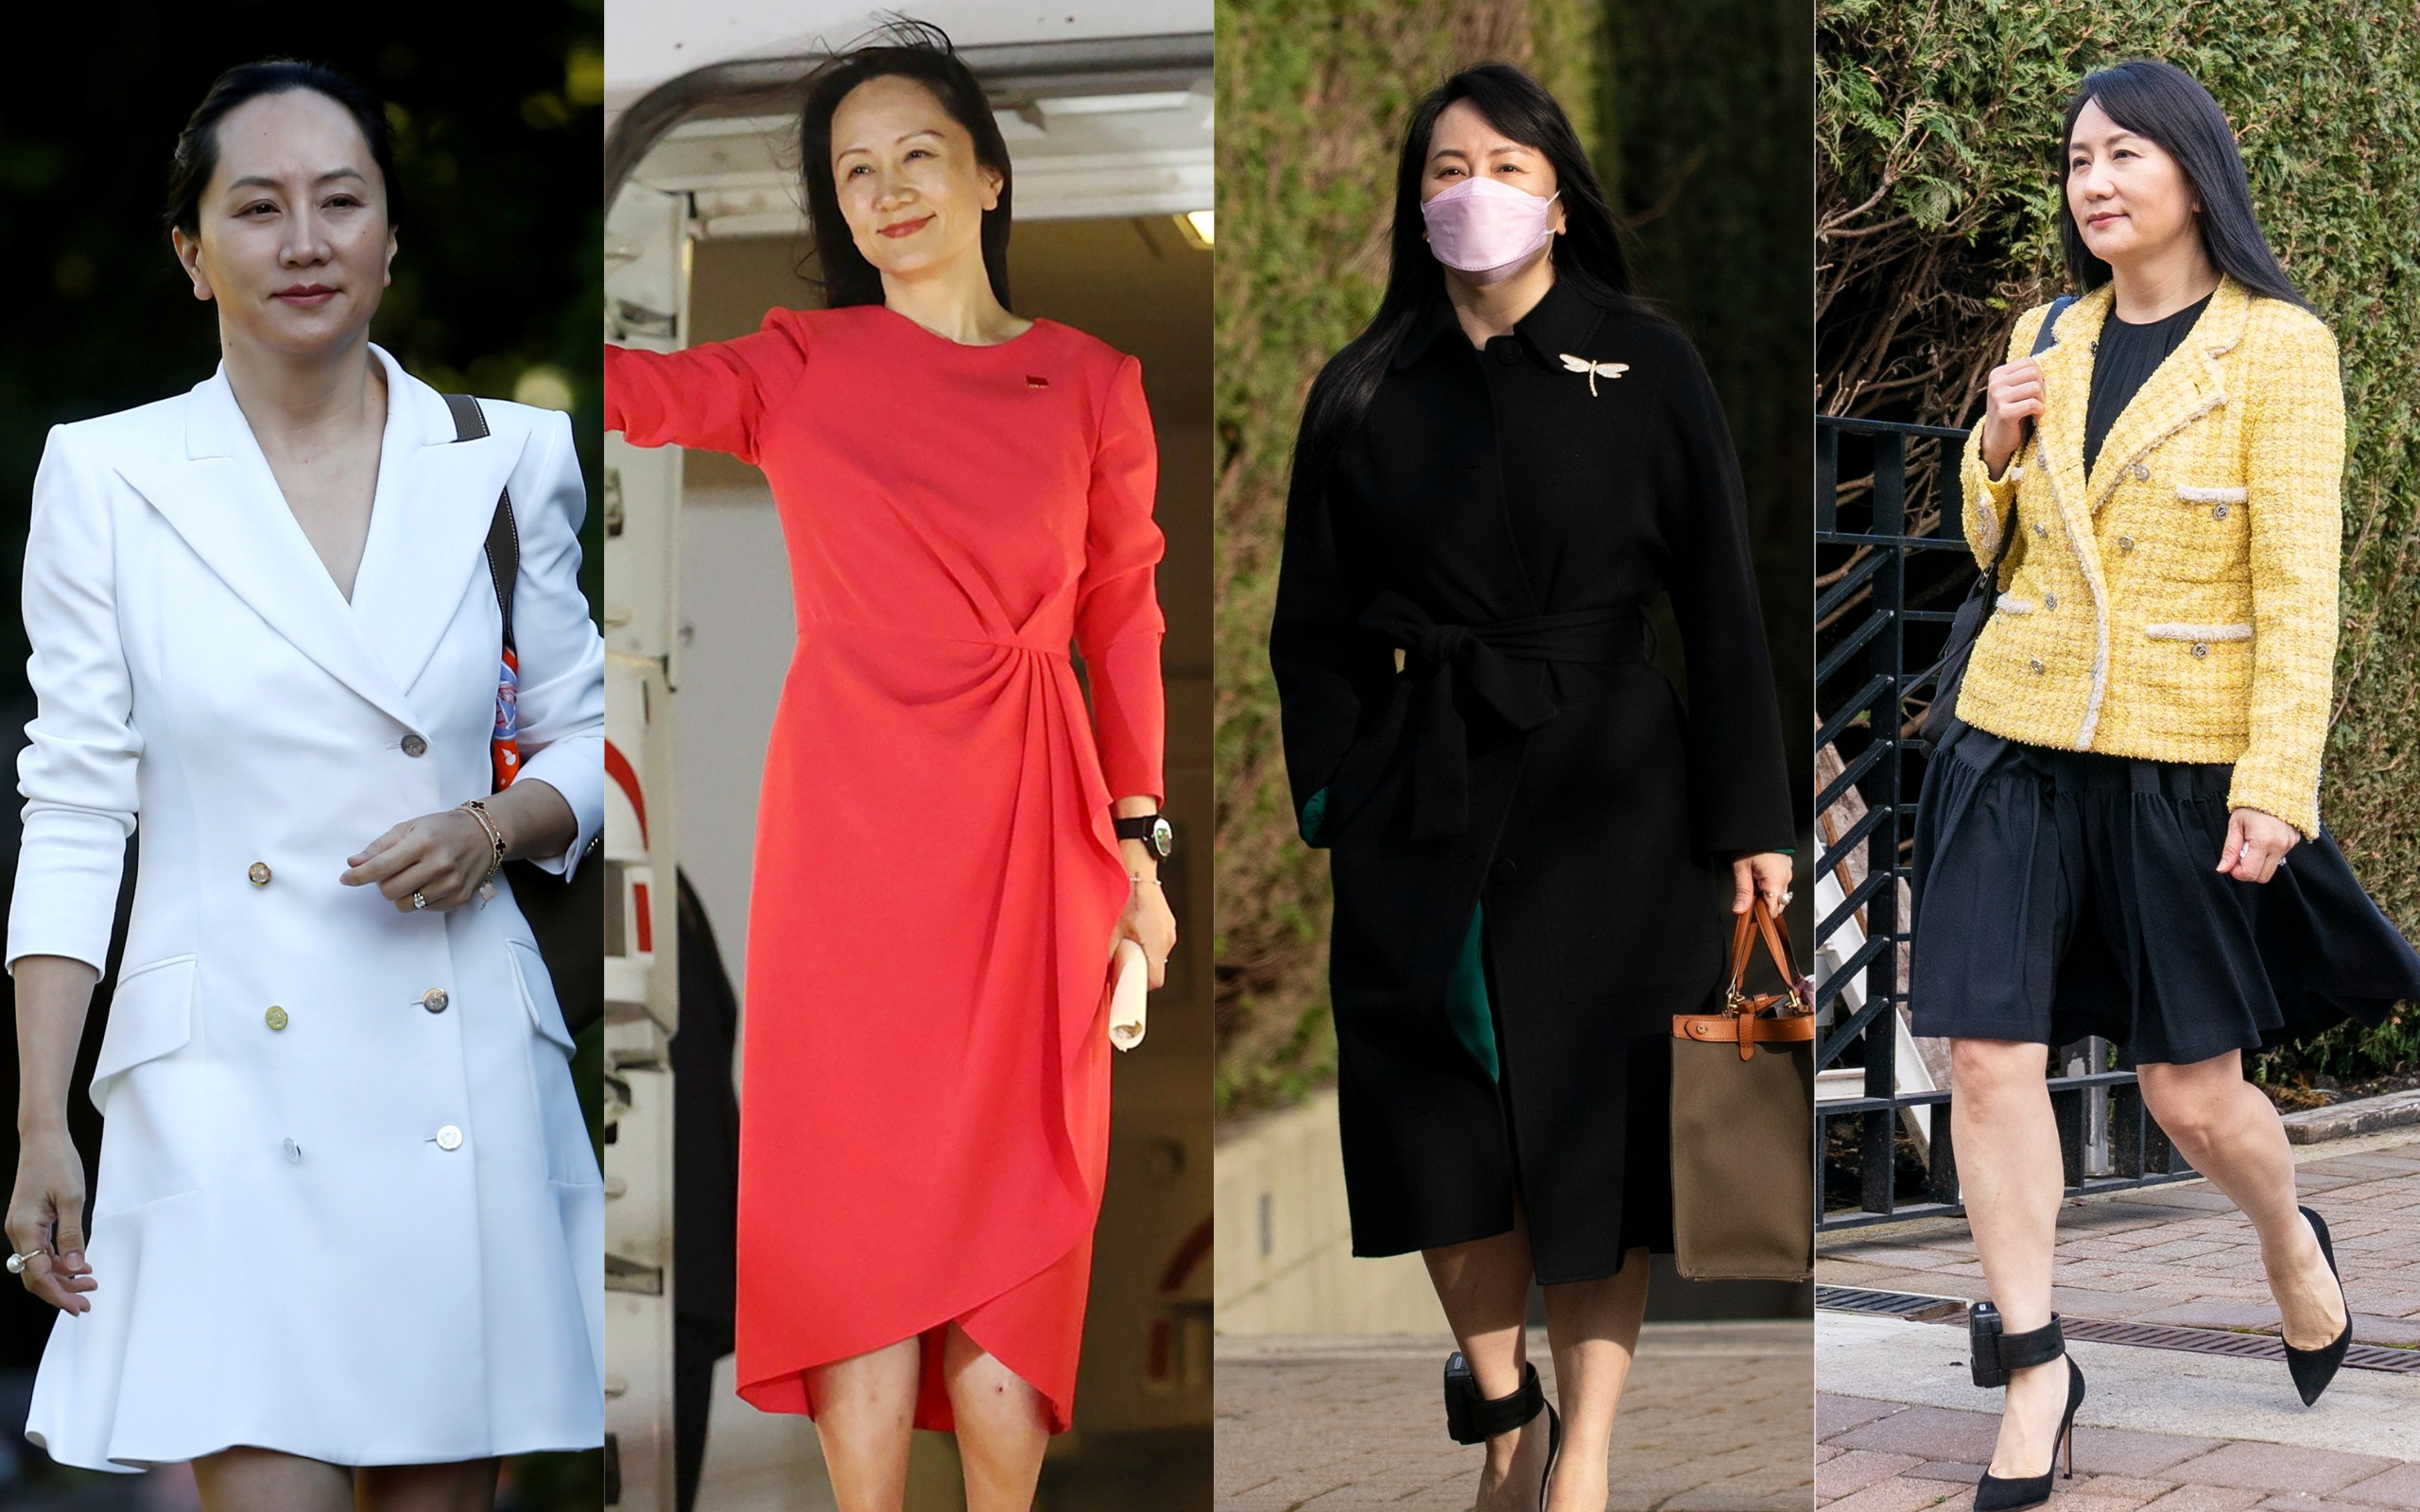 During her detention in Canada, Huawei CFO Meng Wanzhou ditched the hoodies and trainers for stylish looks by designer labels. Photos: Reuters, AP, The Canadian Press